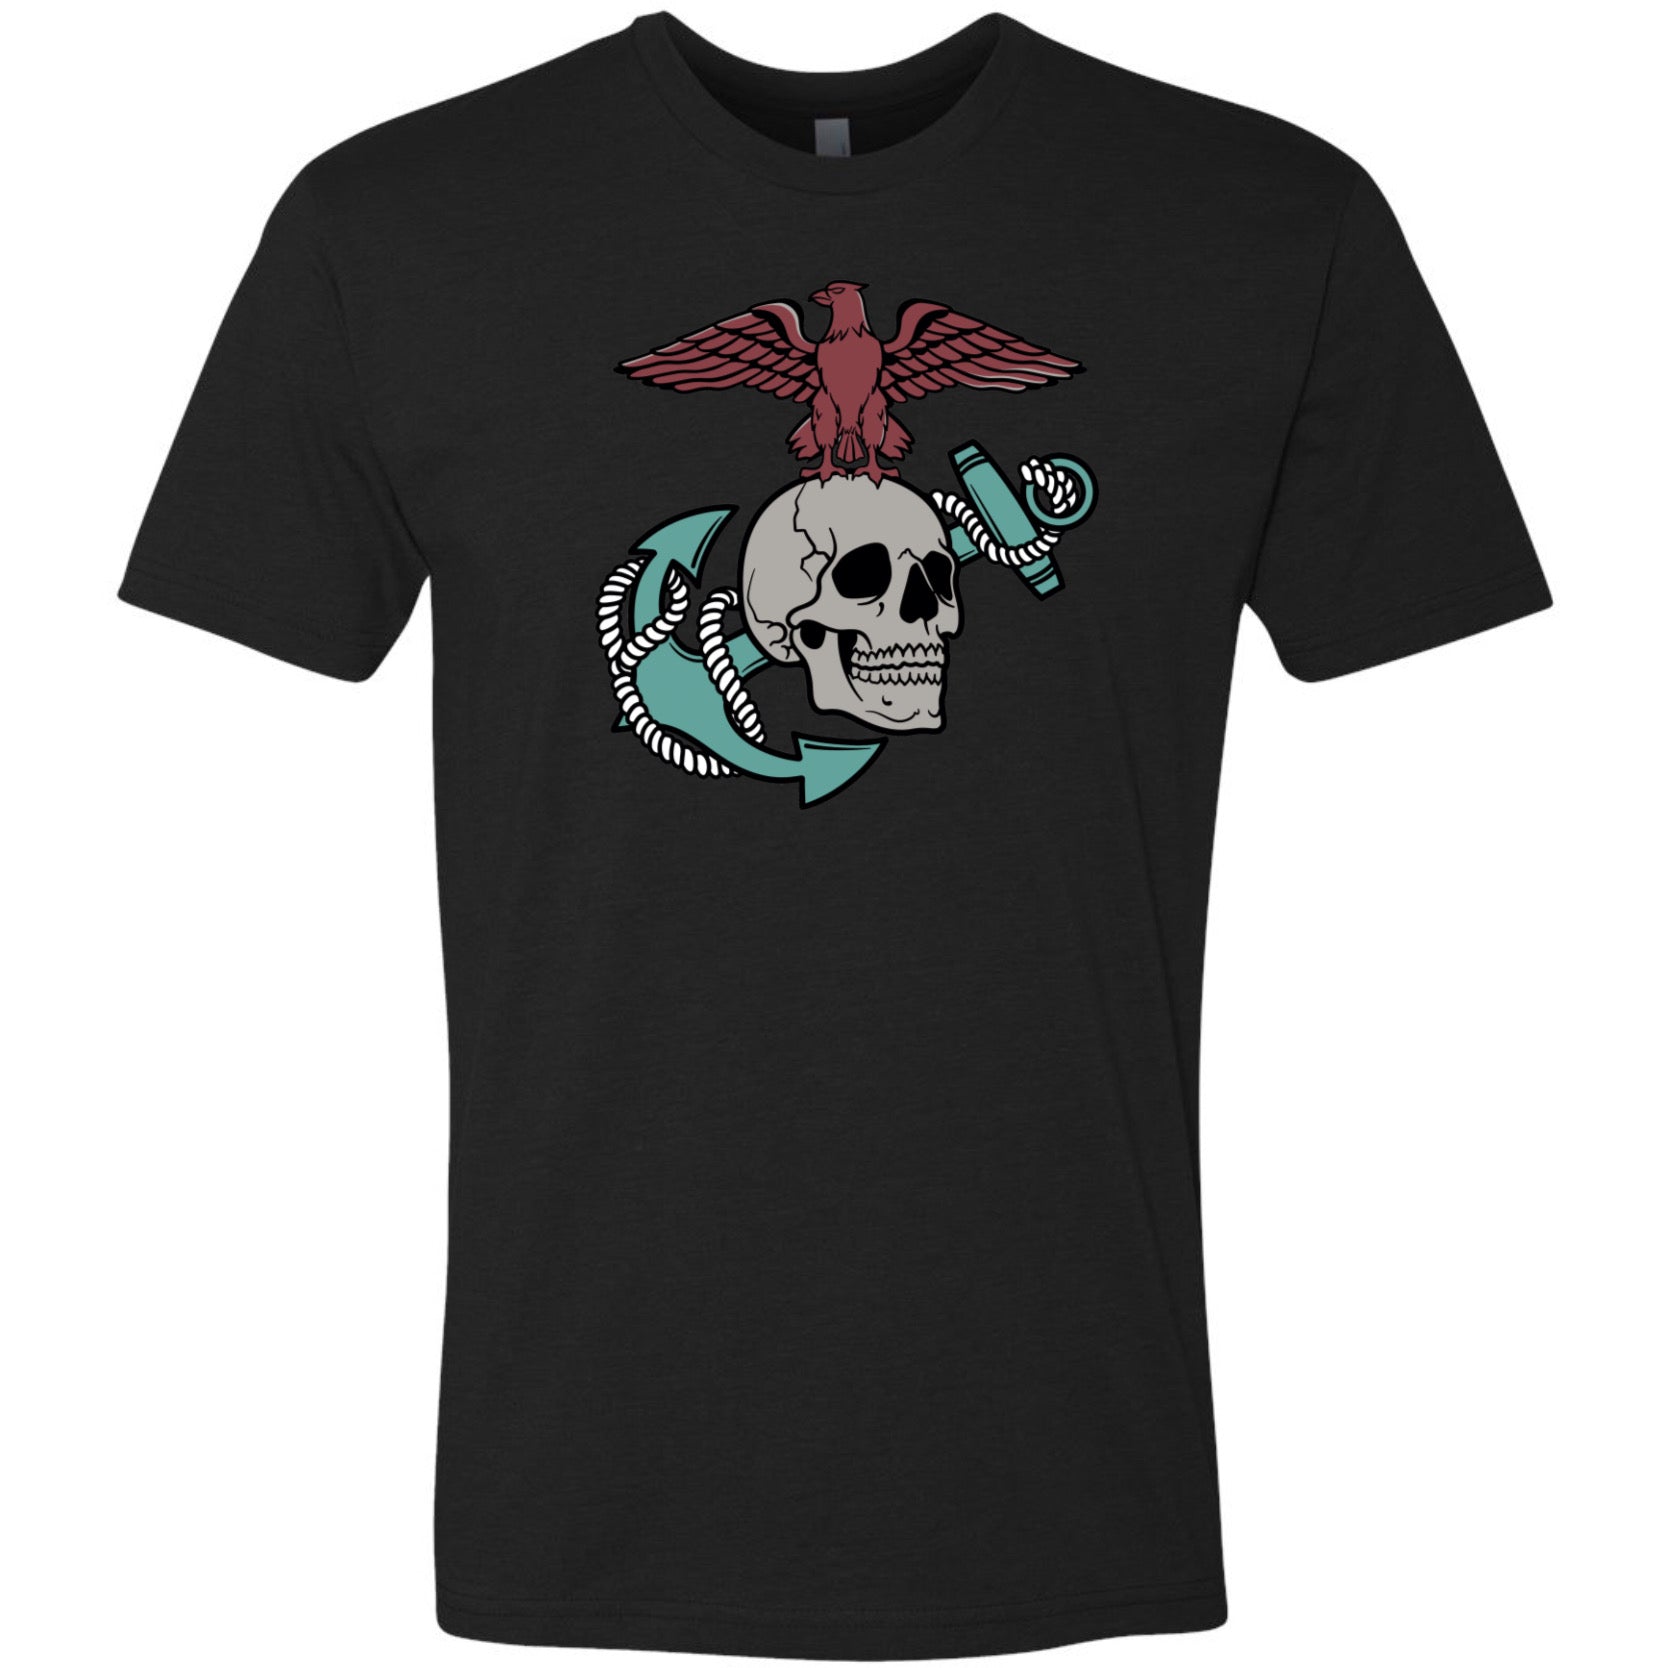 Eagle, Skull and Anchor Tee – Goons Up